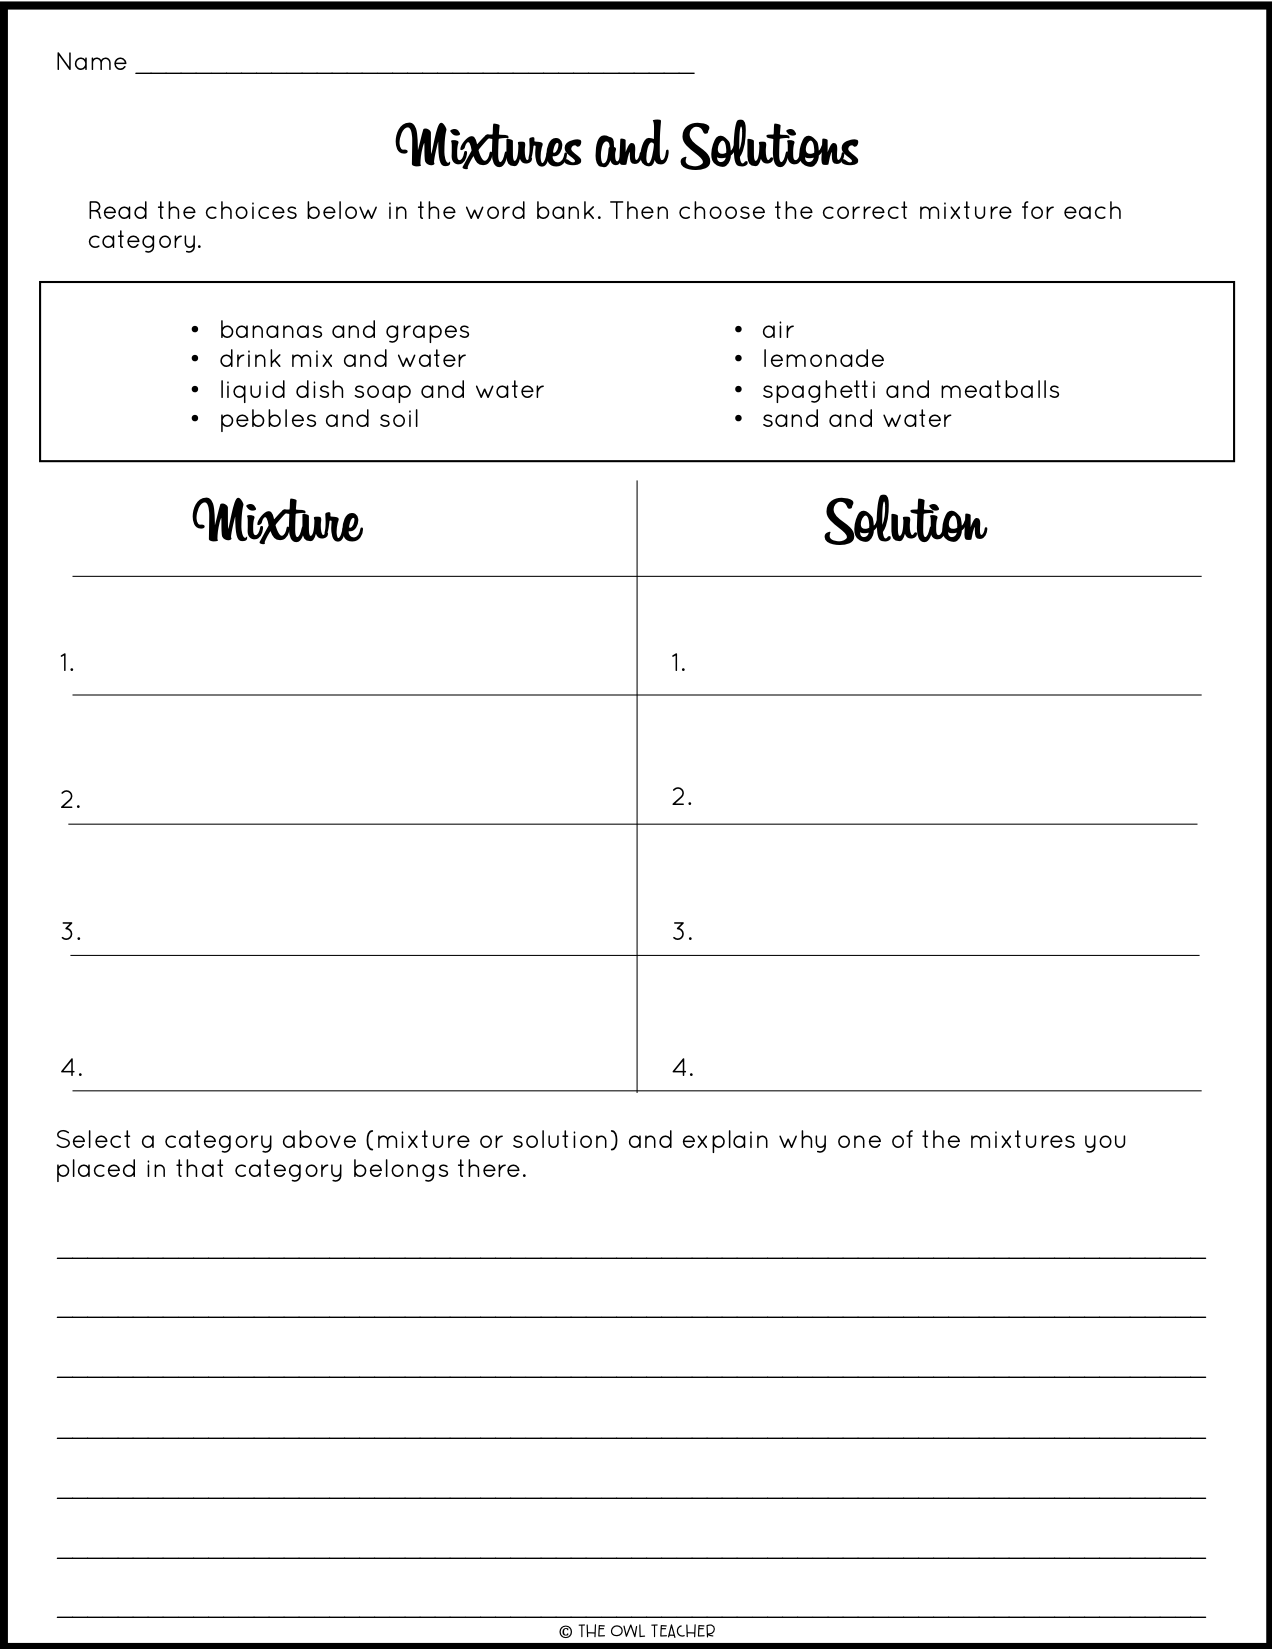 Mixtures and Solutions Craftivity Throughout Mixtures And Solutions Worksheet Answers